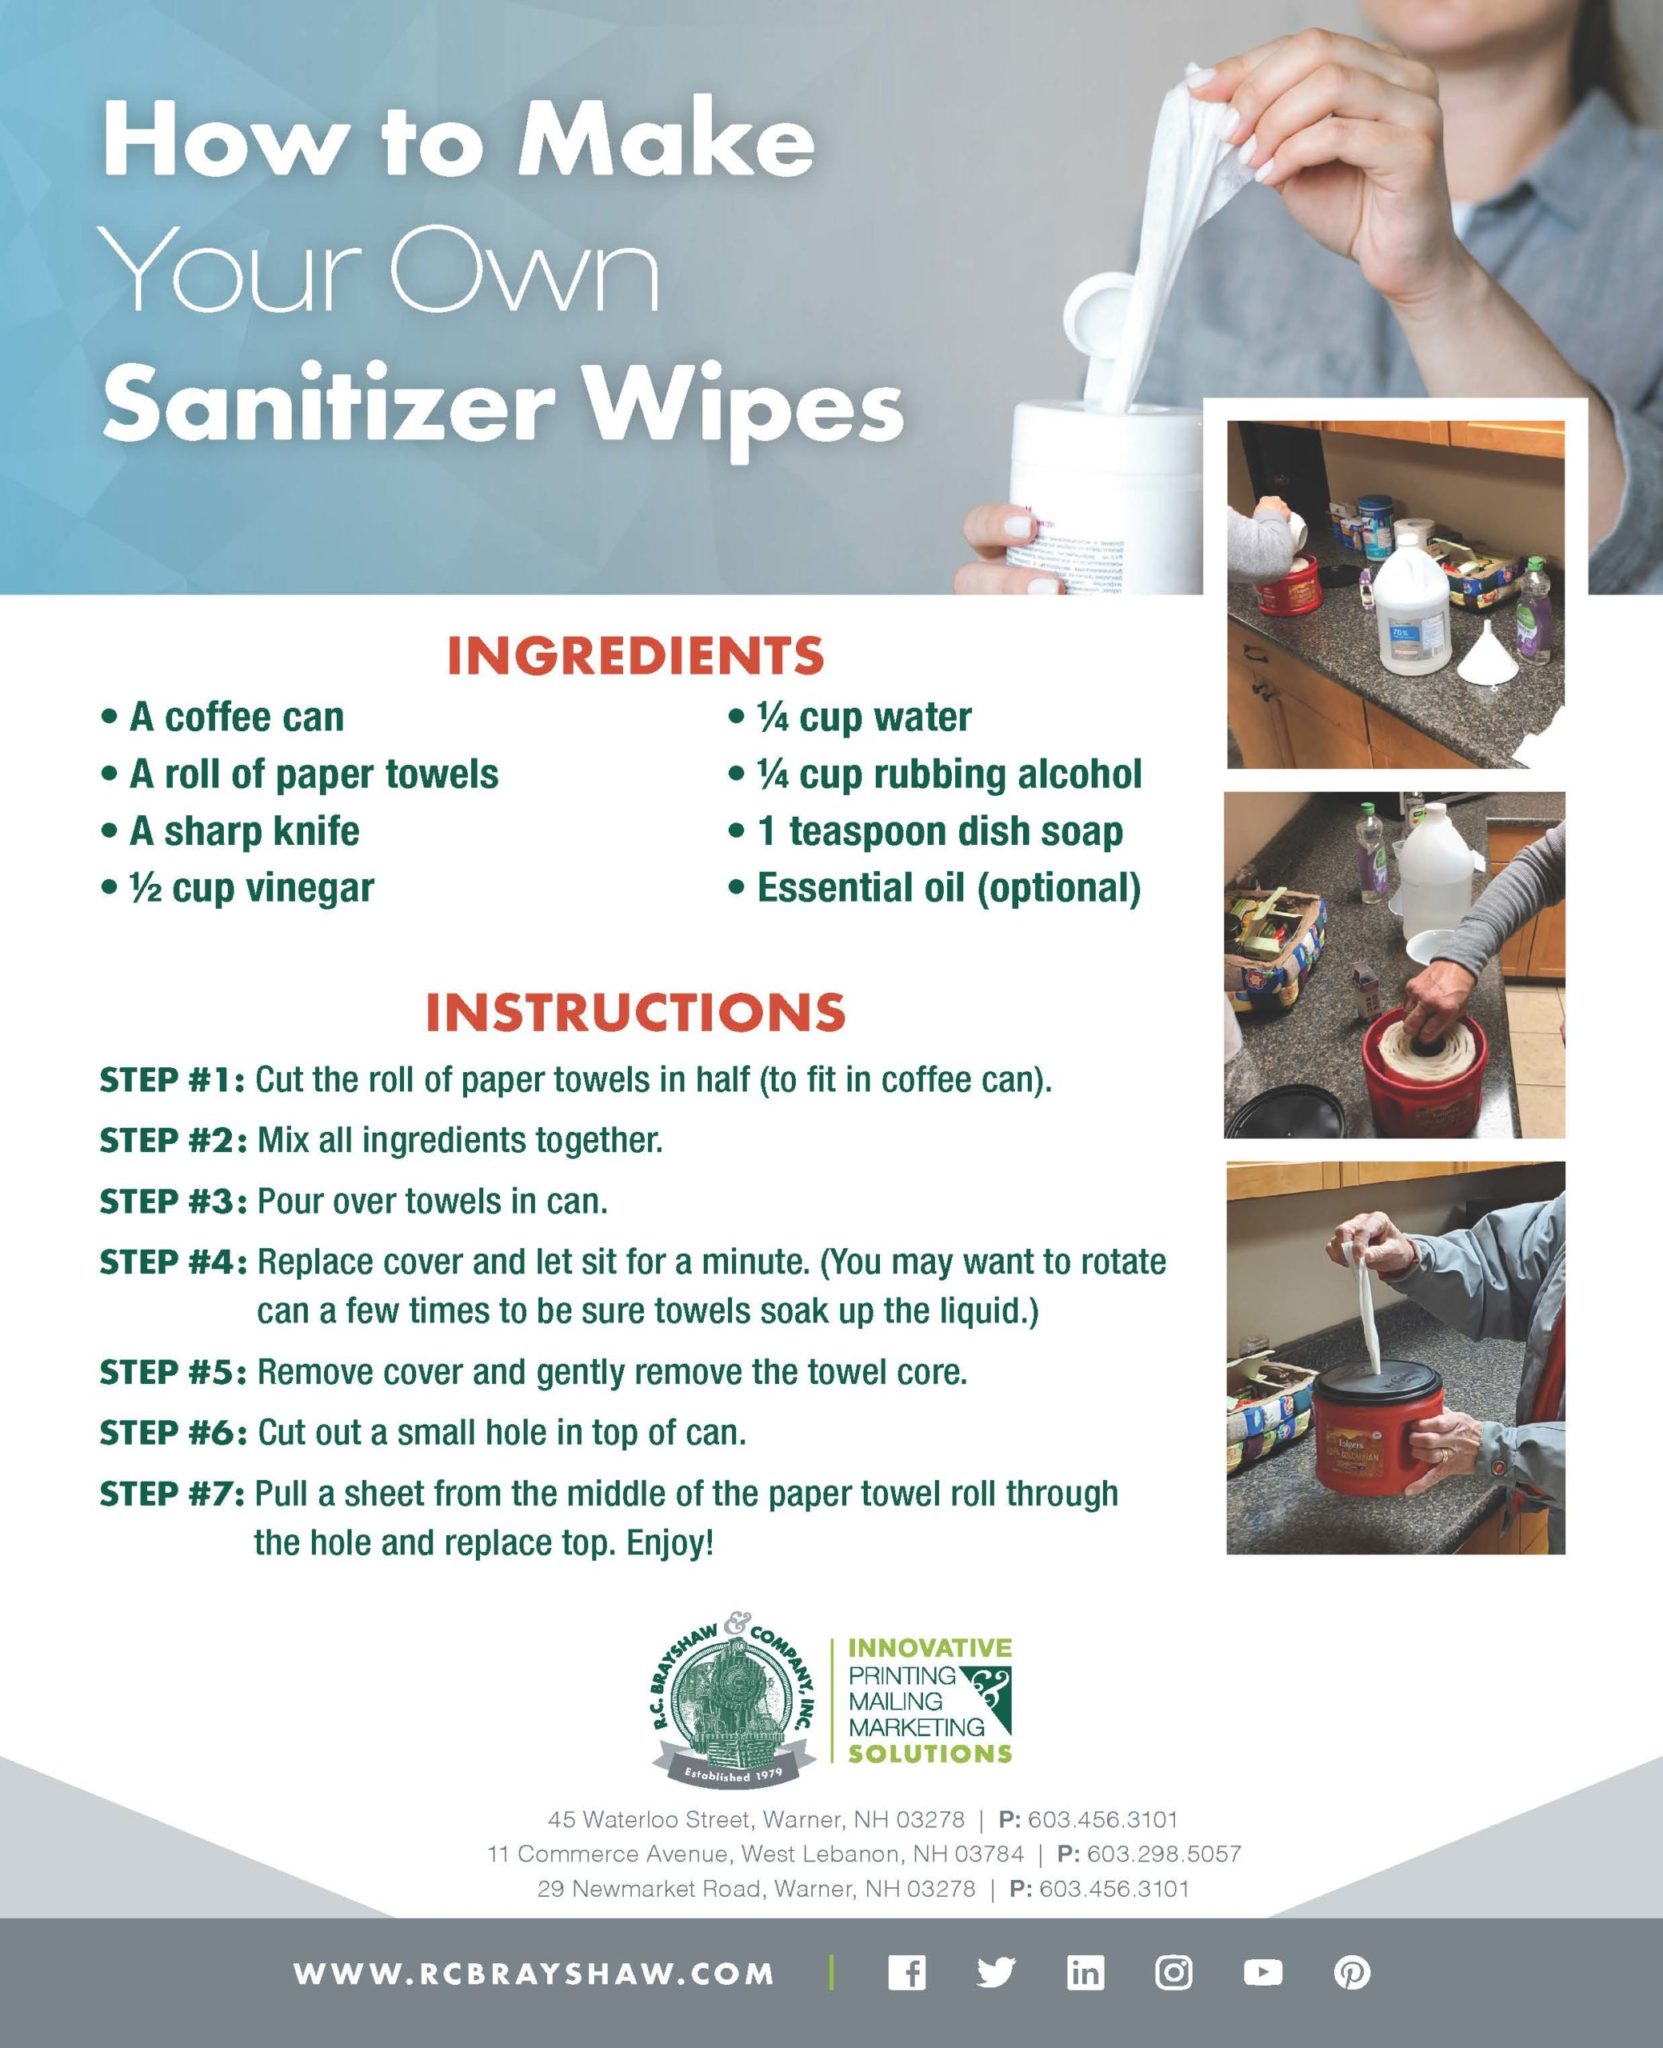 A recipe on how to make your own sanitizer wipes out of common household ingredients.